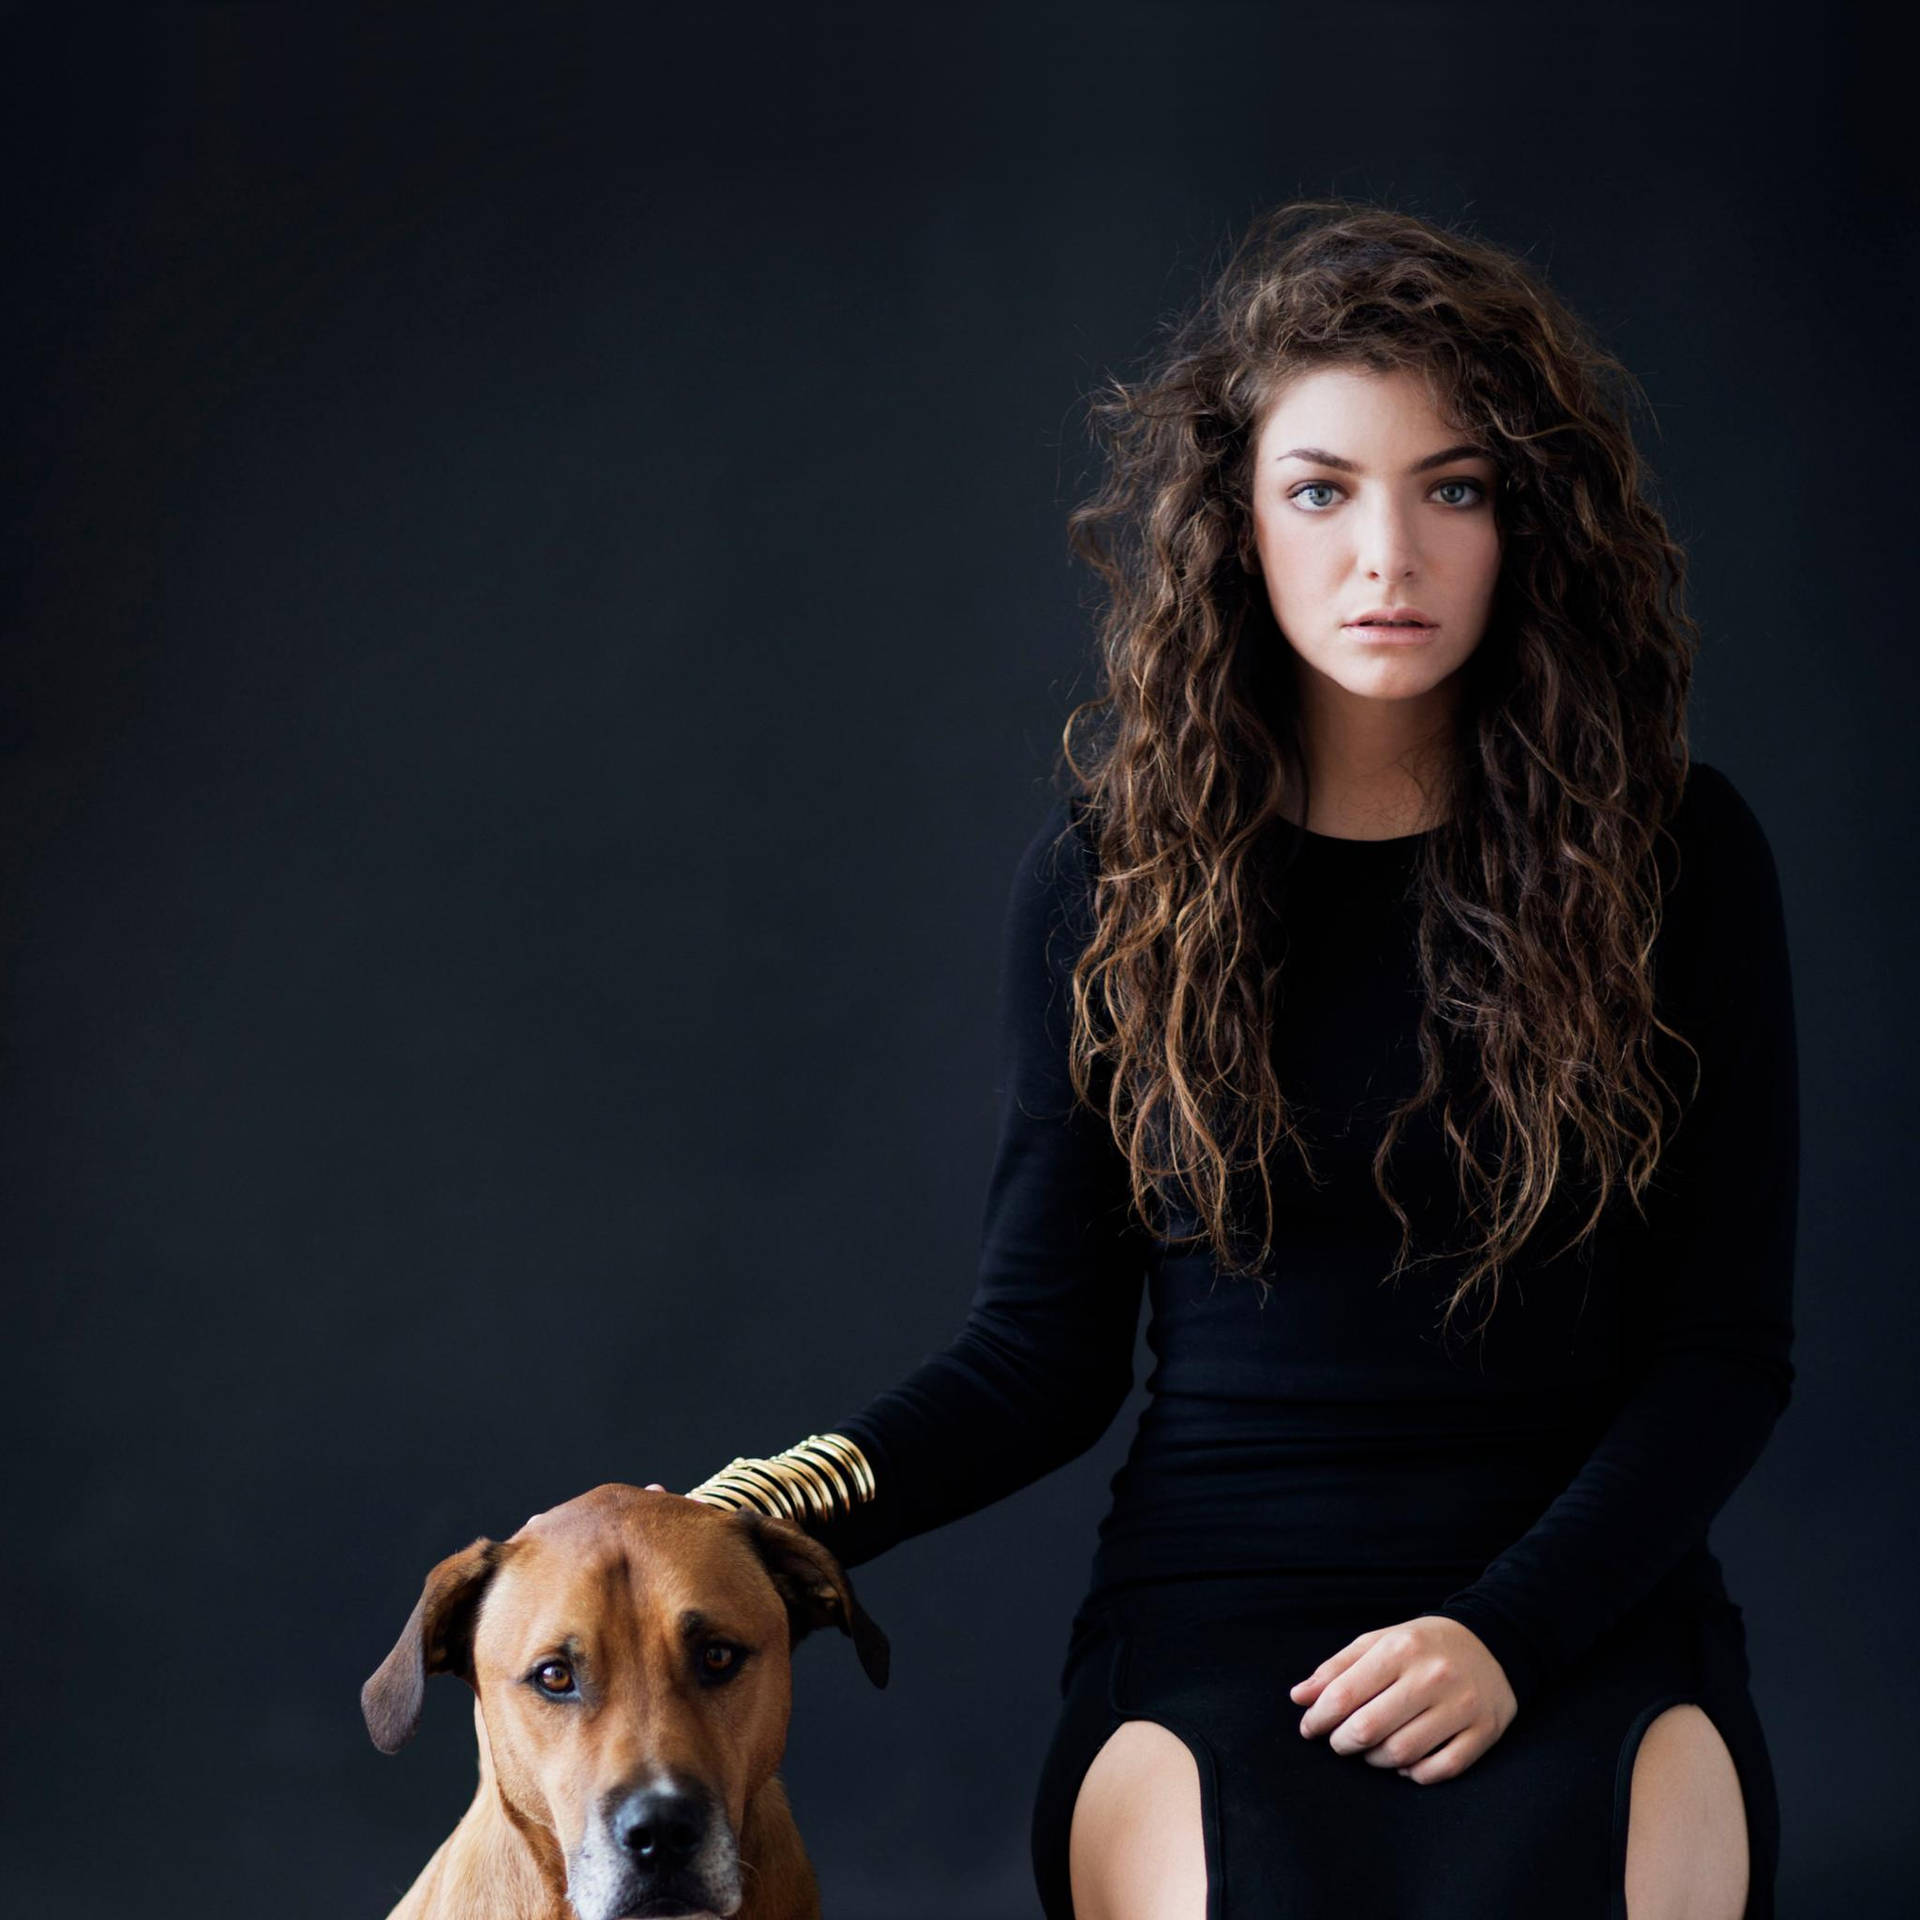 Lorde Pure Heroine With Dog Background